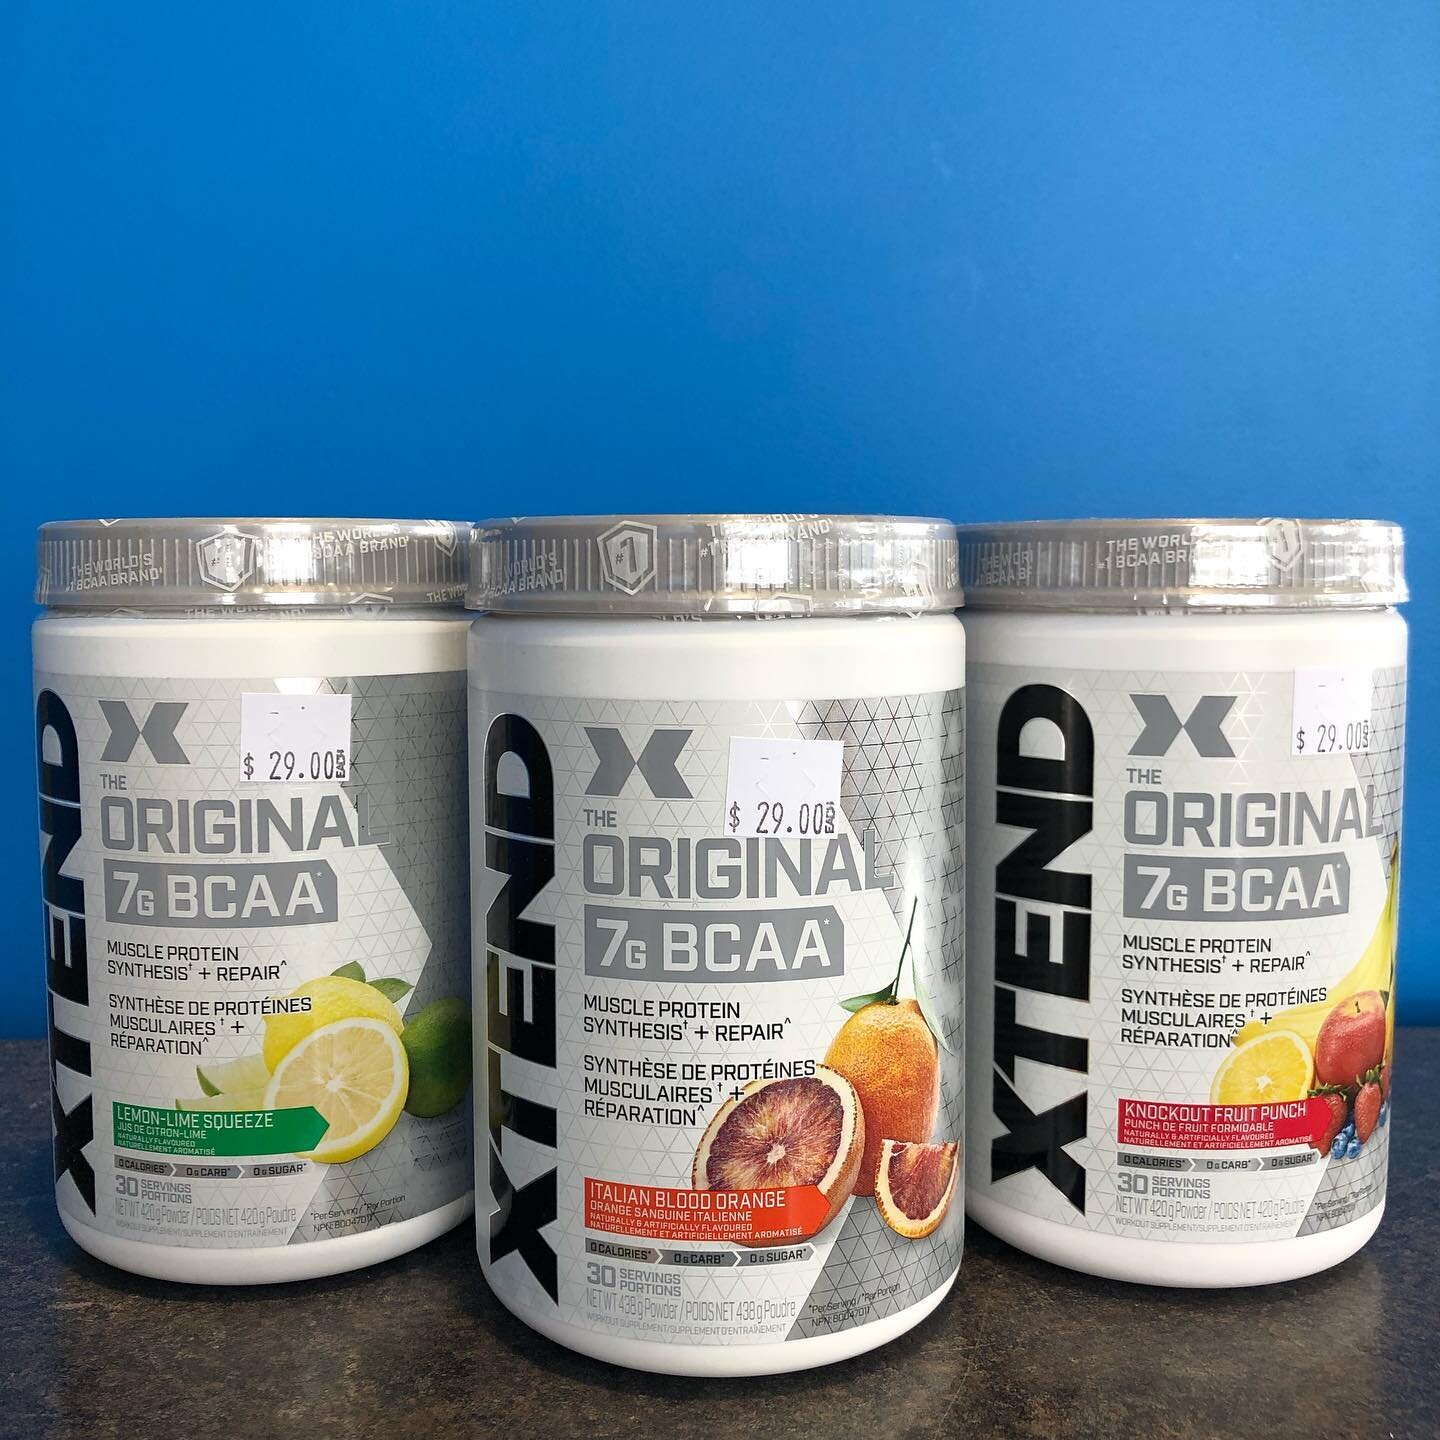 New flavours of XTEND BCAAs just arrived! Who&rsquo;s ready for some fresh summer flavours?! 

🍊Blood Orange
🍒Fruit Punch
🍋Lemon Lime

#bbdepotmh #shoplocal #supplements #gains #homegym #bcaas #healthylifestyle #xtend